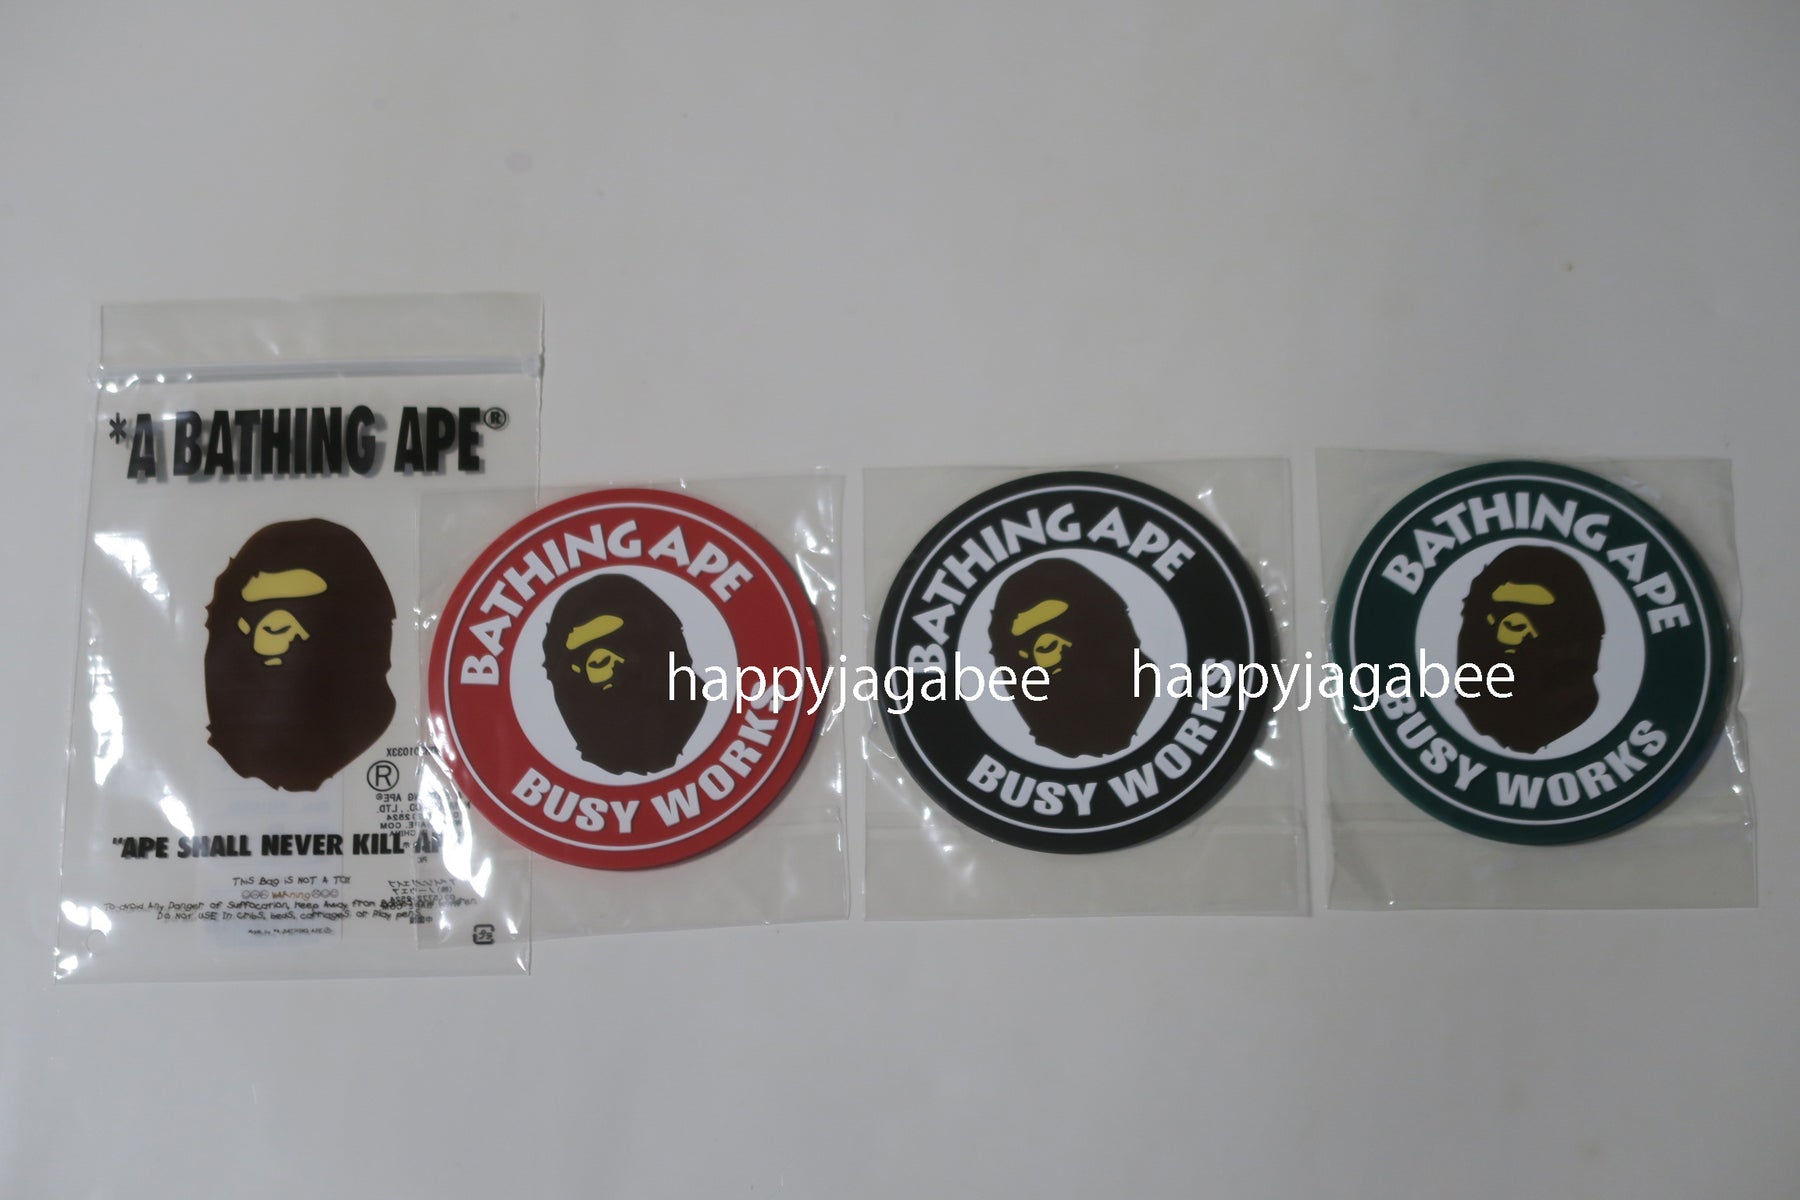 A BATHING APE BUSY WORKS RUBBER COASTER – happyjagabee store